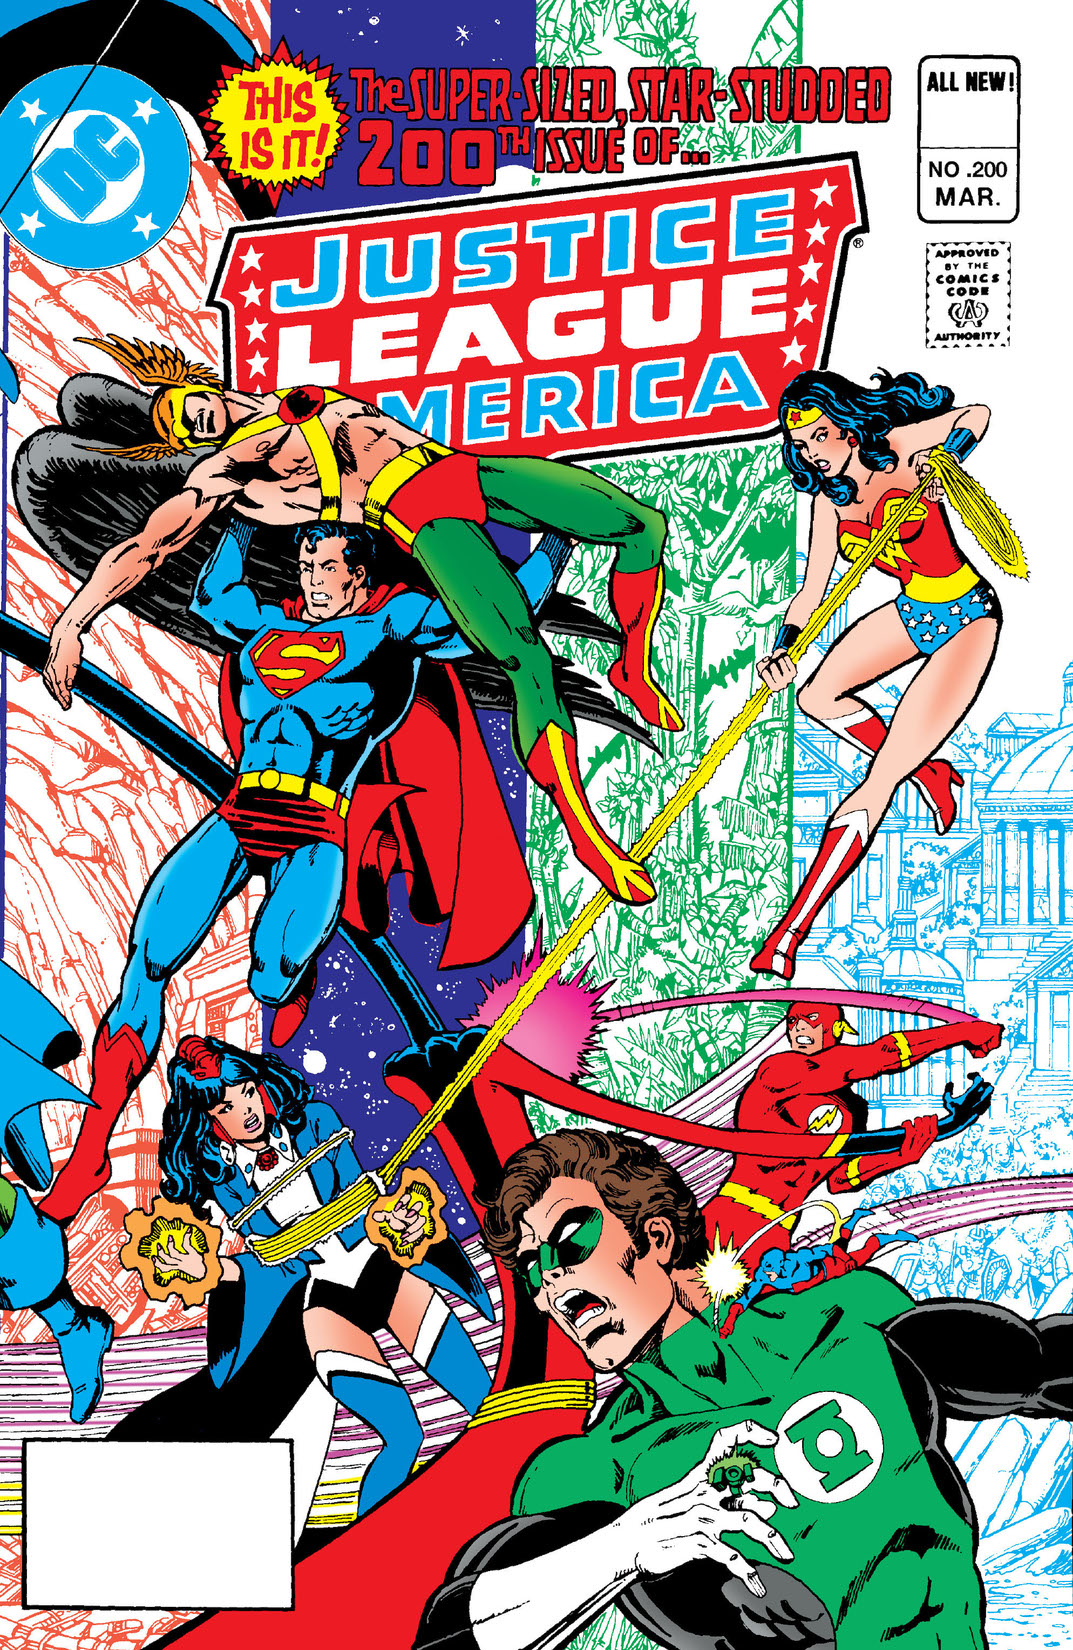 Justice League of America (1960-) #200 preview images